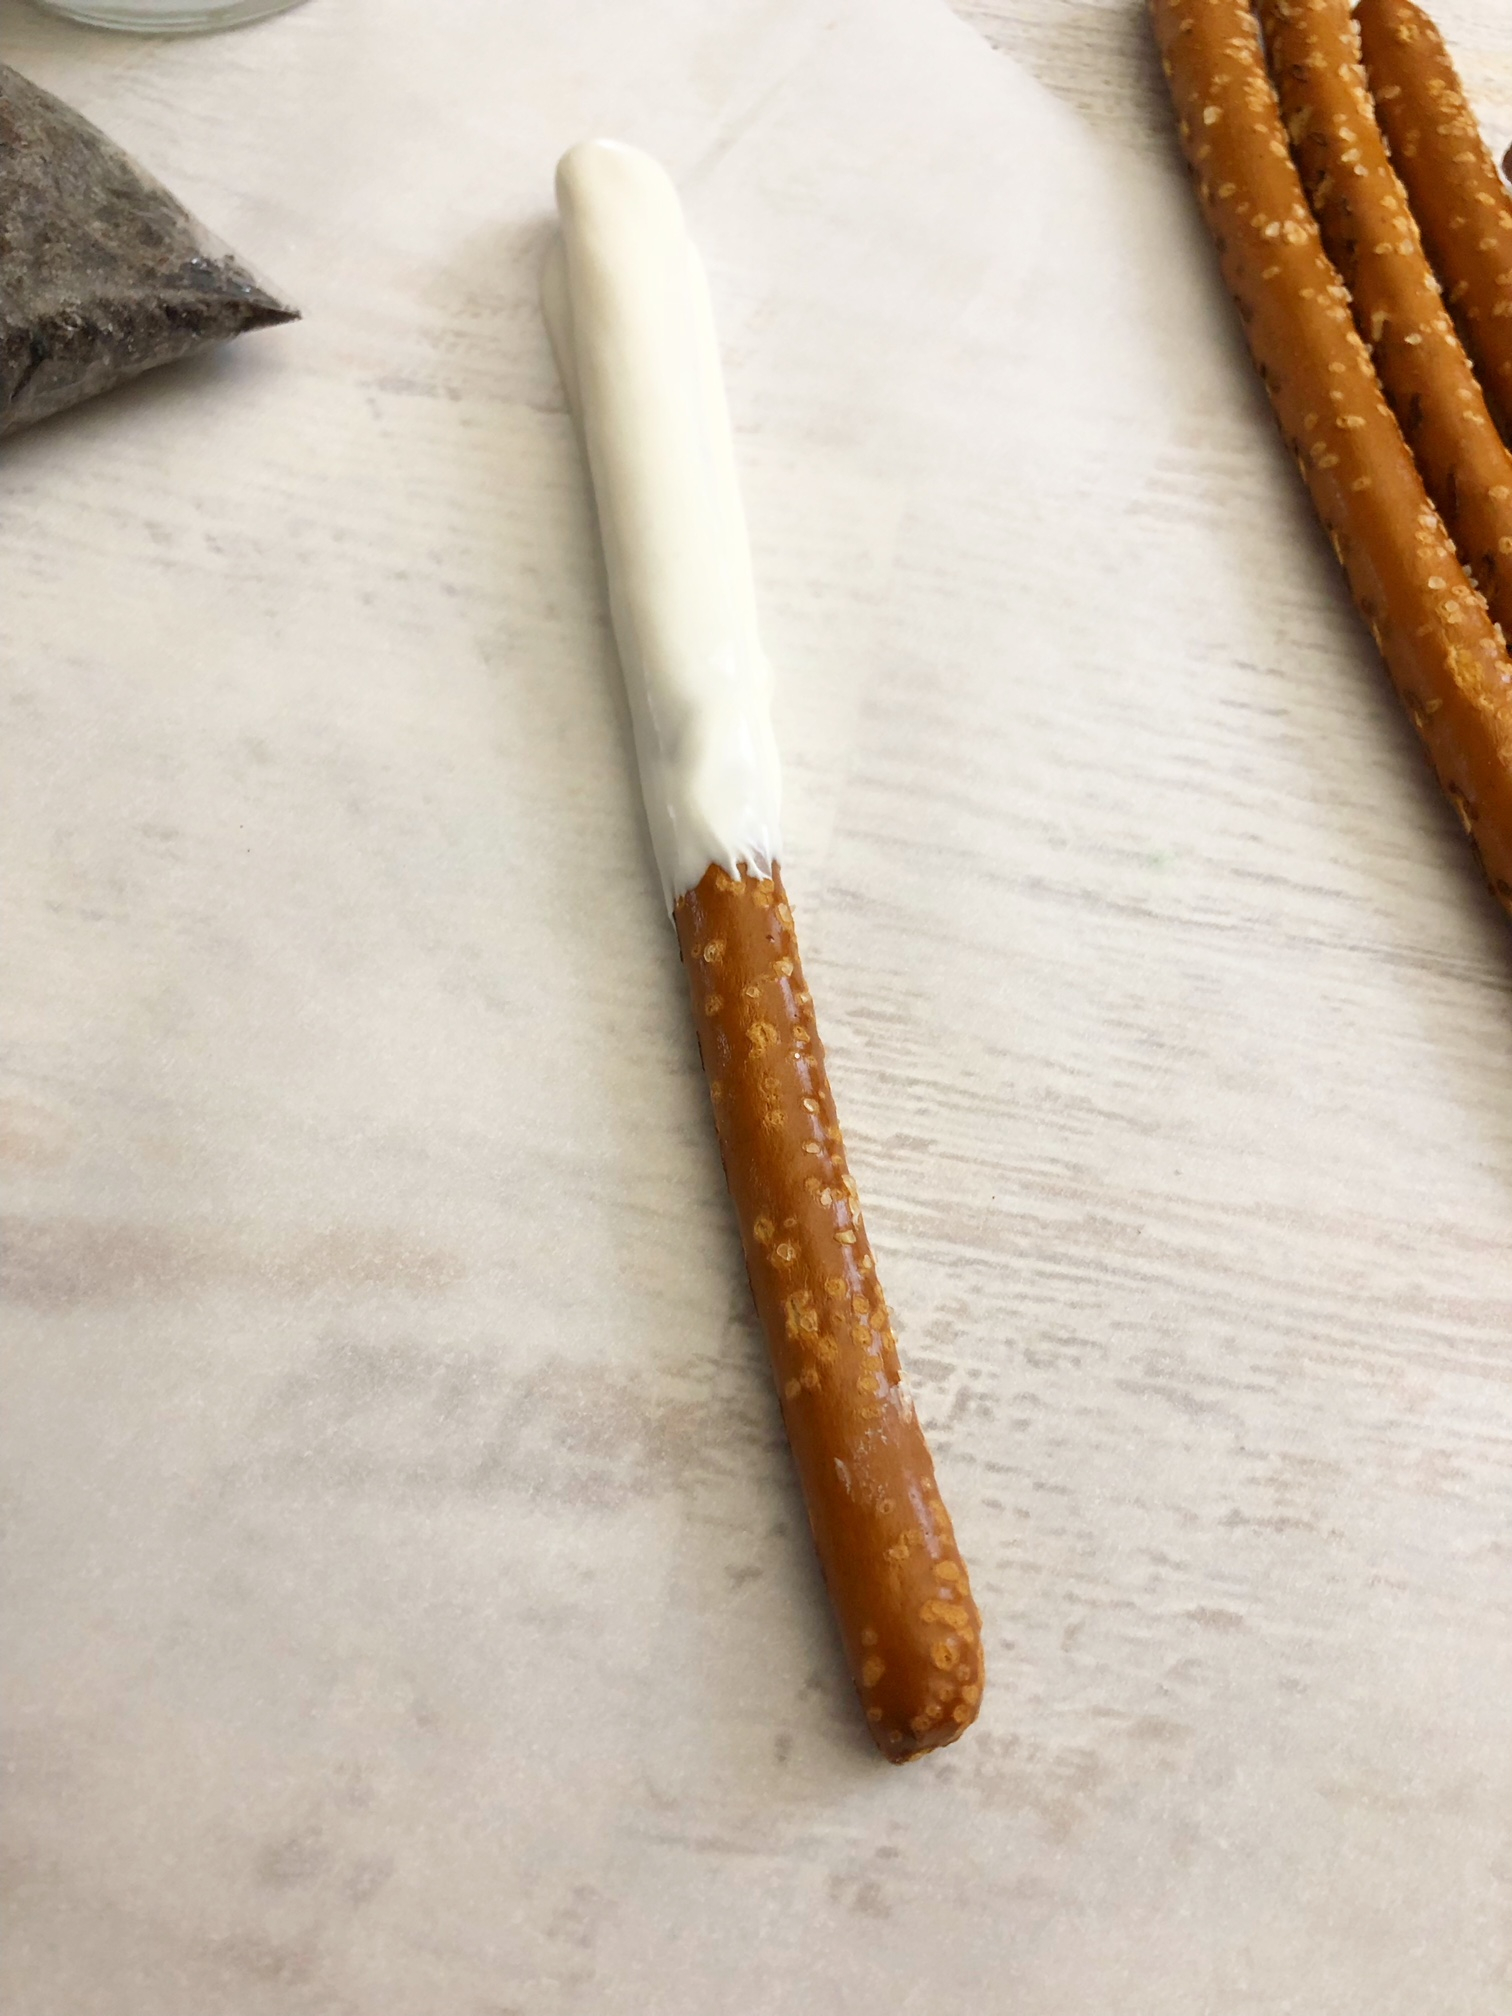 Pretzel rod dipped in white chocolate